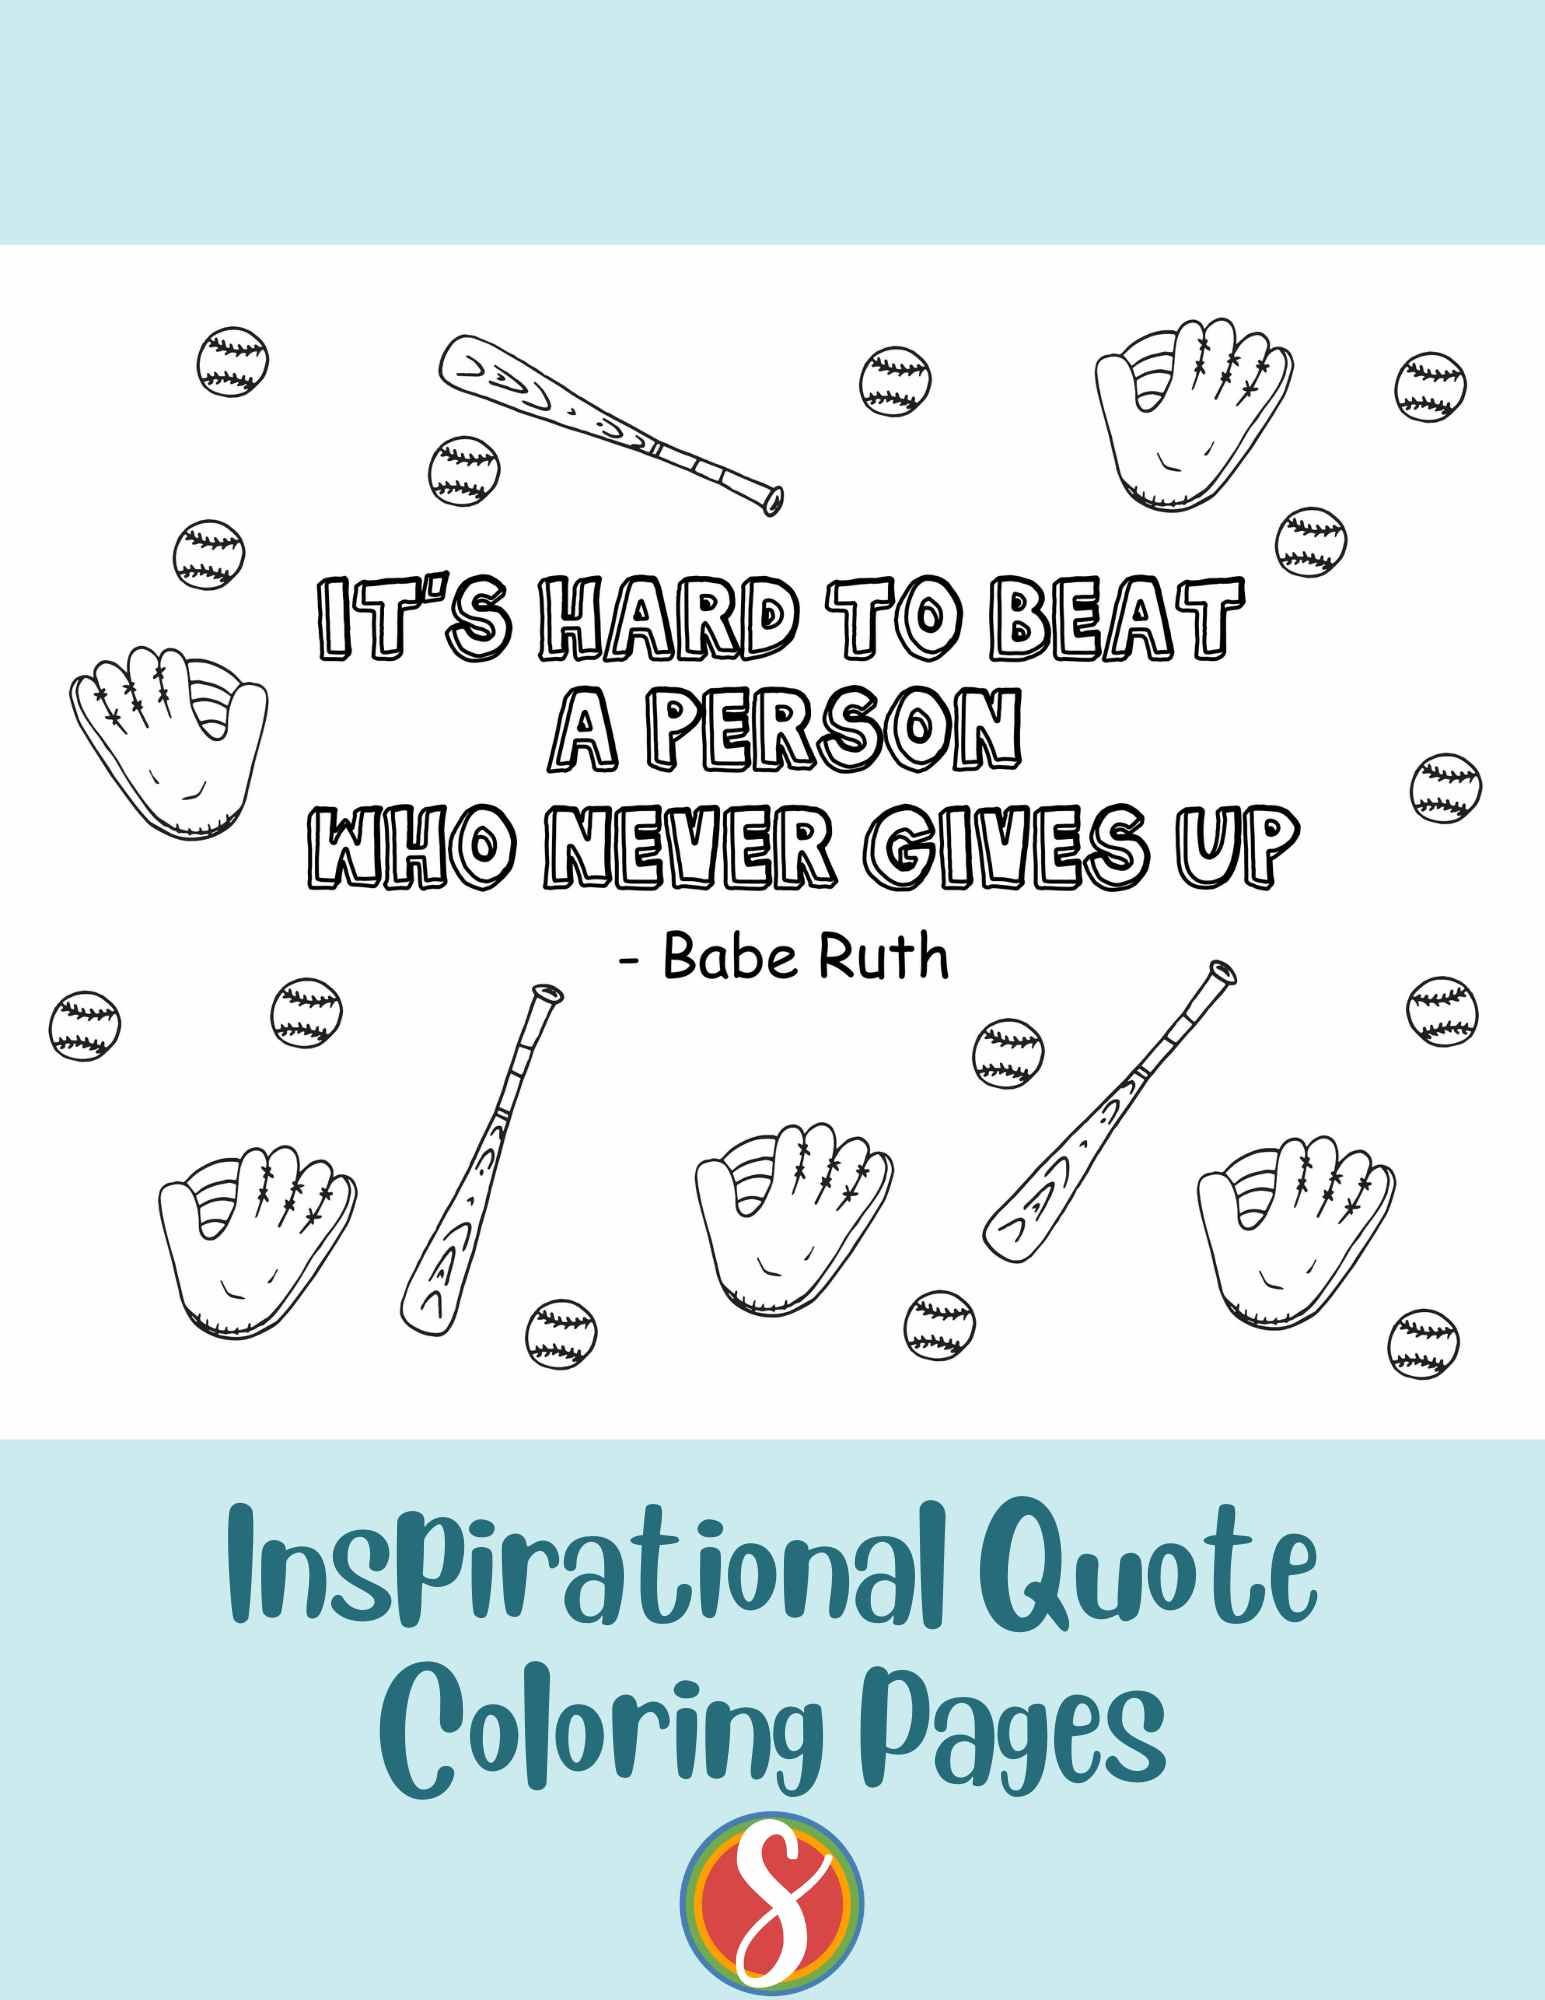 colorable text "It's har to beat a person who never gives up" text - babe Ruth, little colorable drawings of mitts, bats, baseballs all around